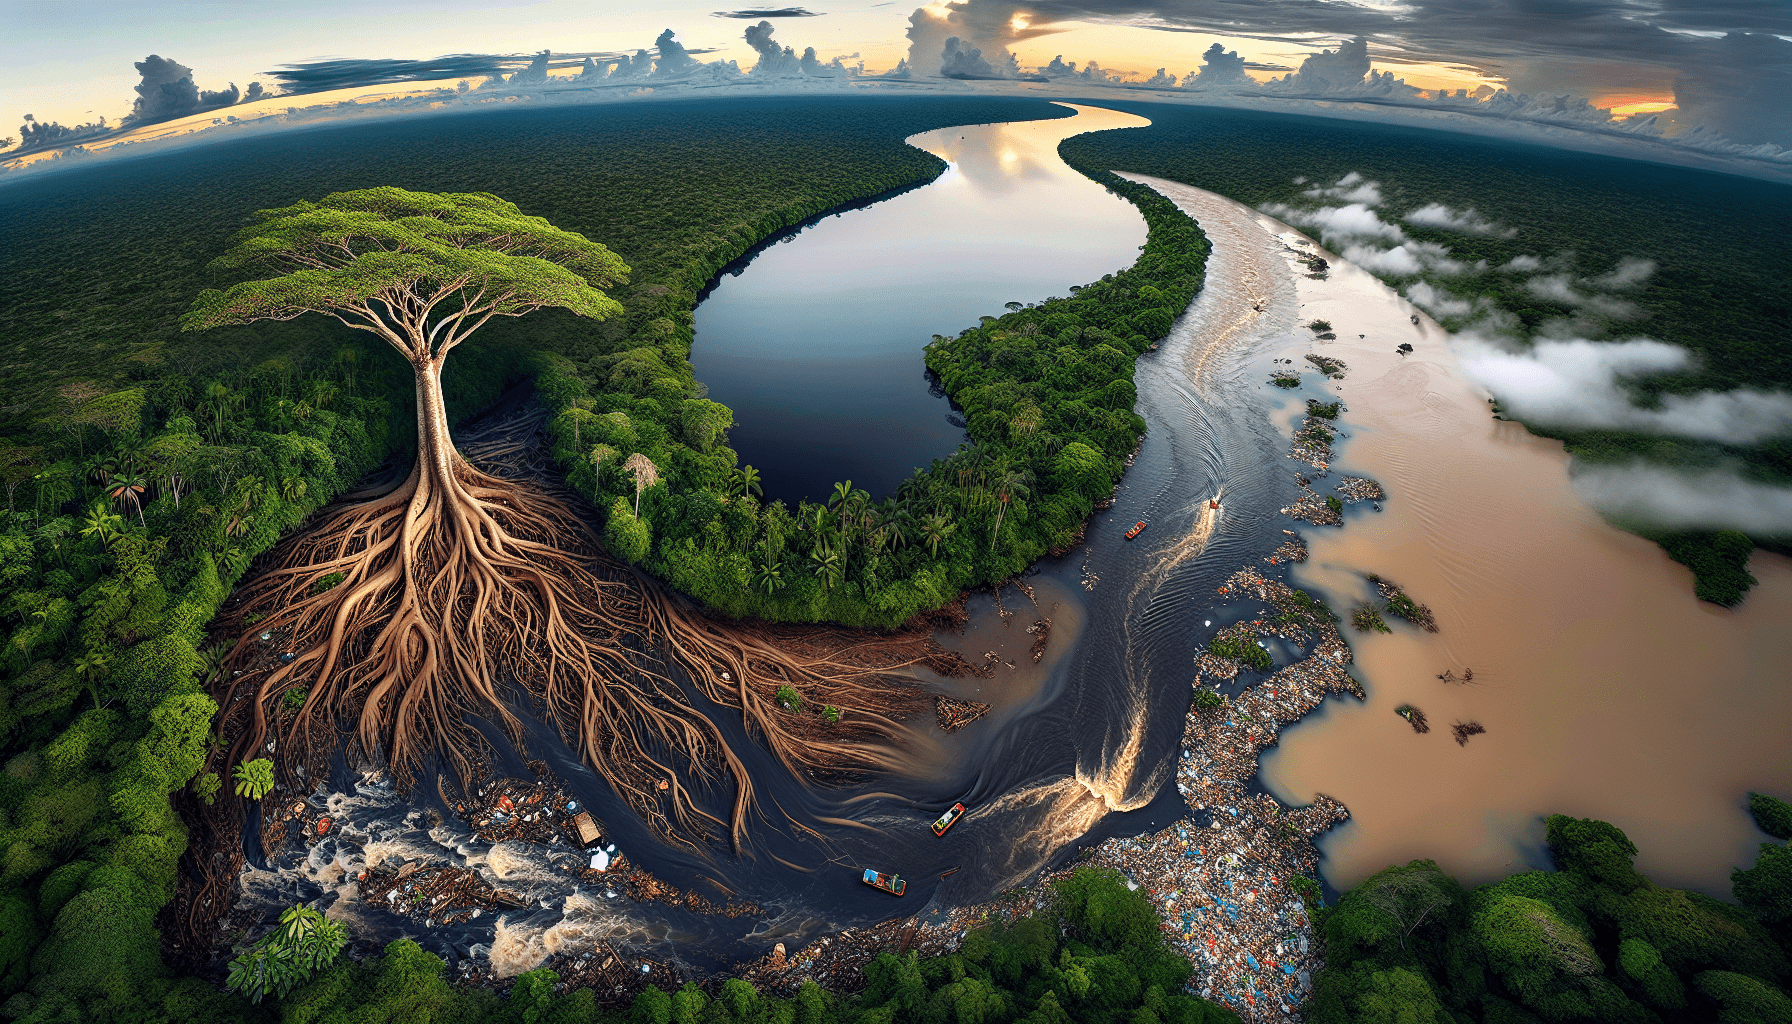 What Problems Is The Amazon River Facing?